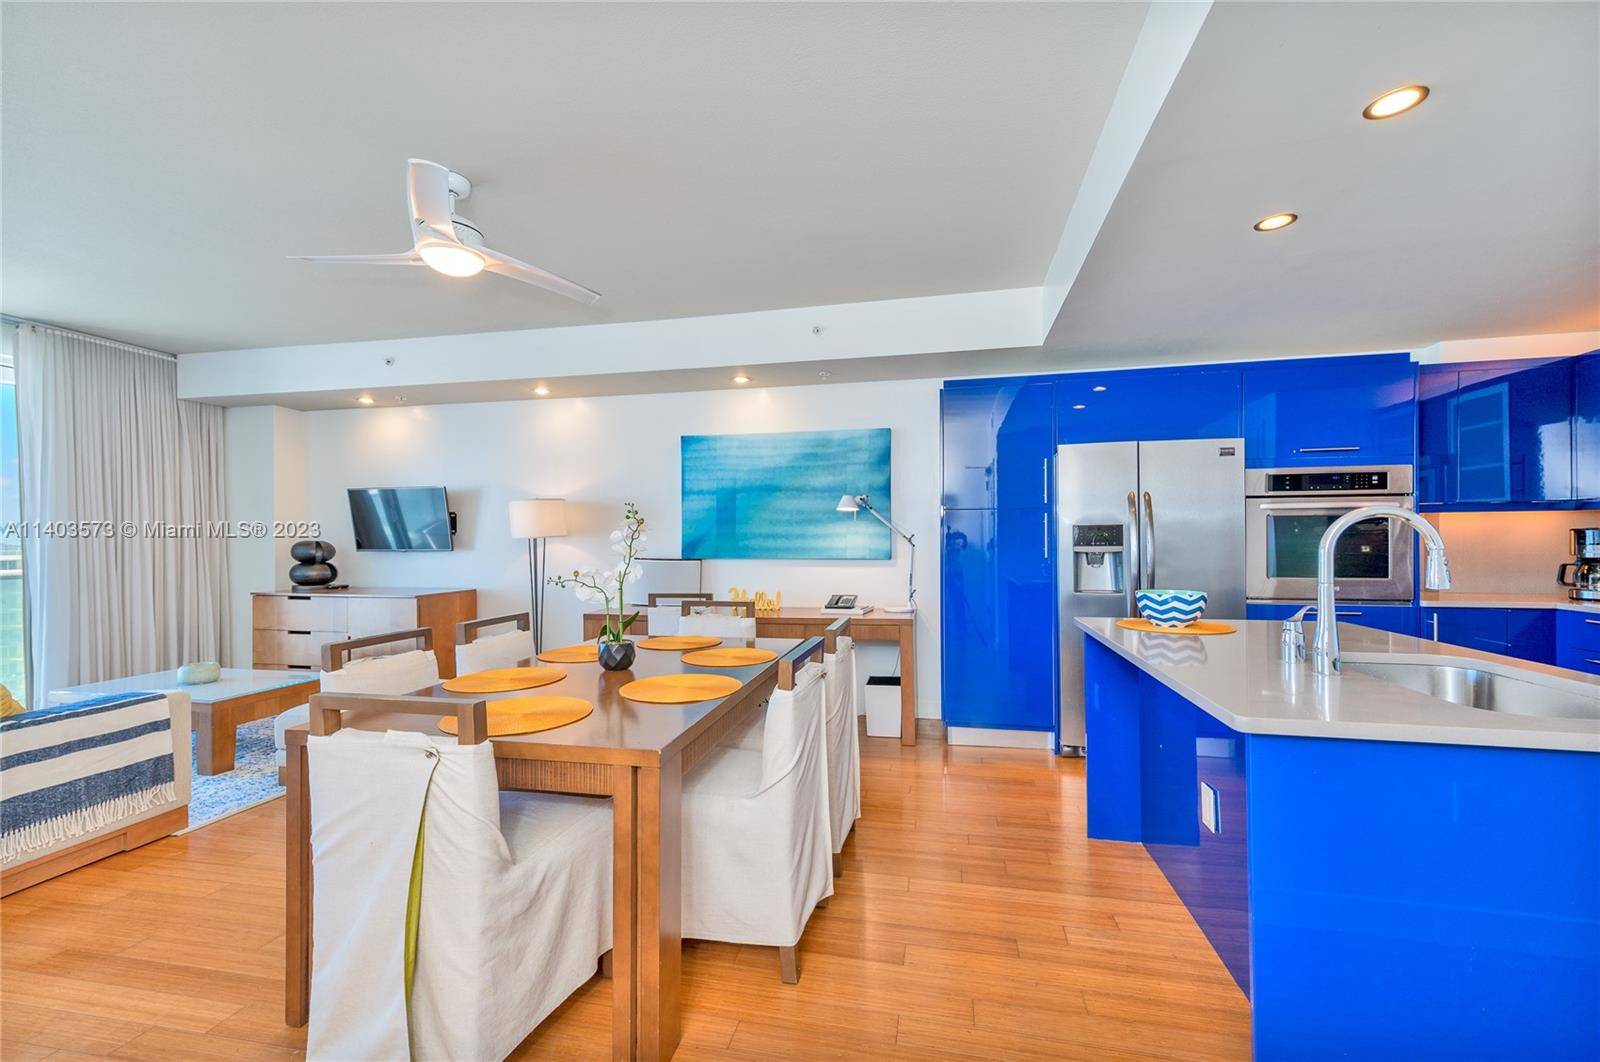 Experience the convenience of a fully equipped one bedroom residence at W Fort Lauderdale, perfect for either a vacation getaway or a productive work from home experience, surrounded by excellent ...